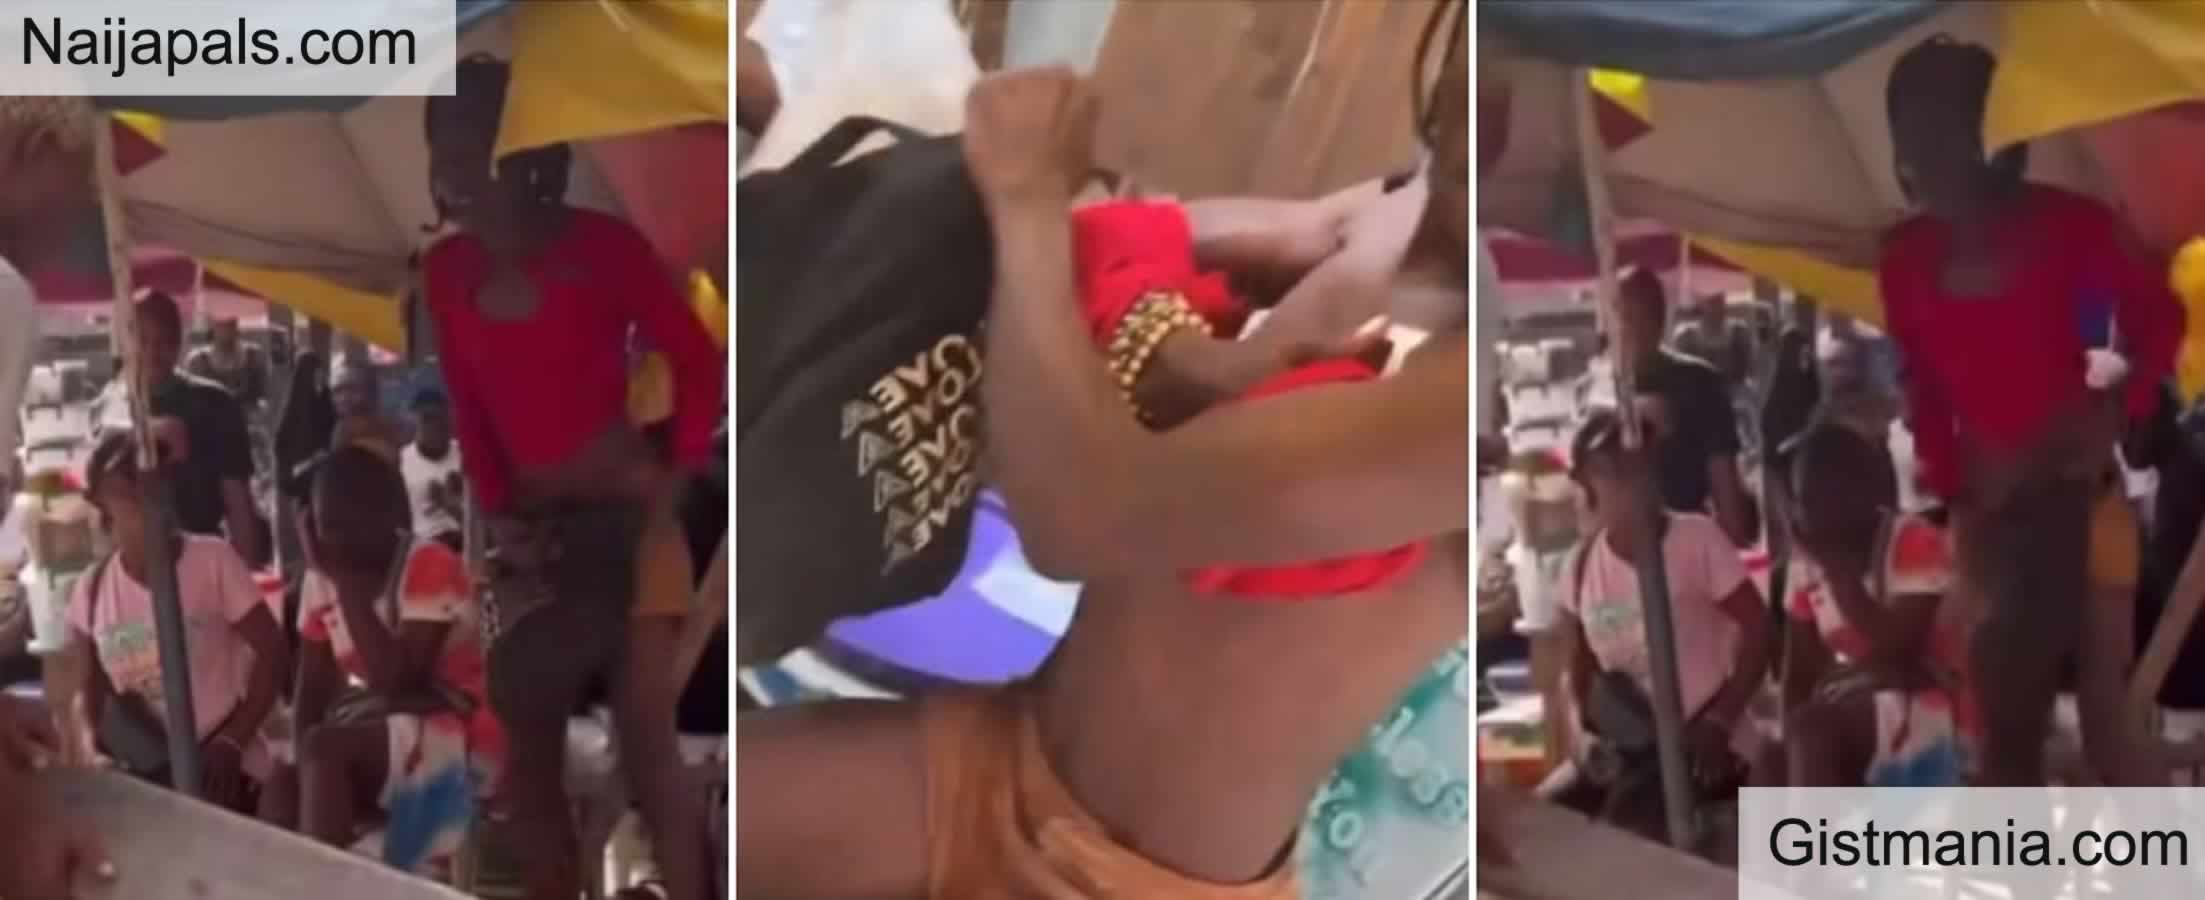 Drama As Men Publicly Humiliate Crossdresser, Forces Him To Remove His Clothes While At Salon